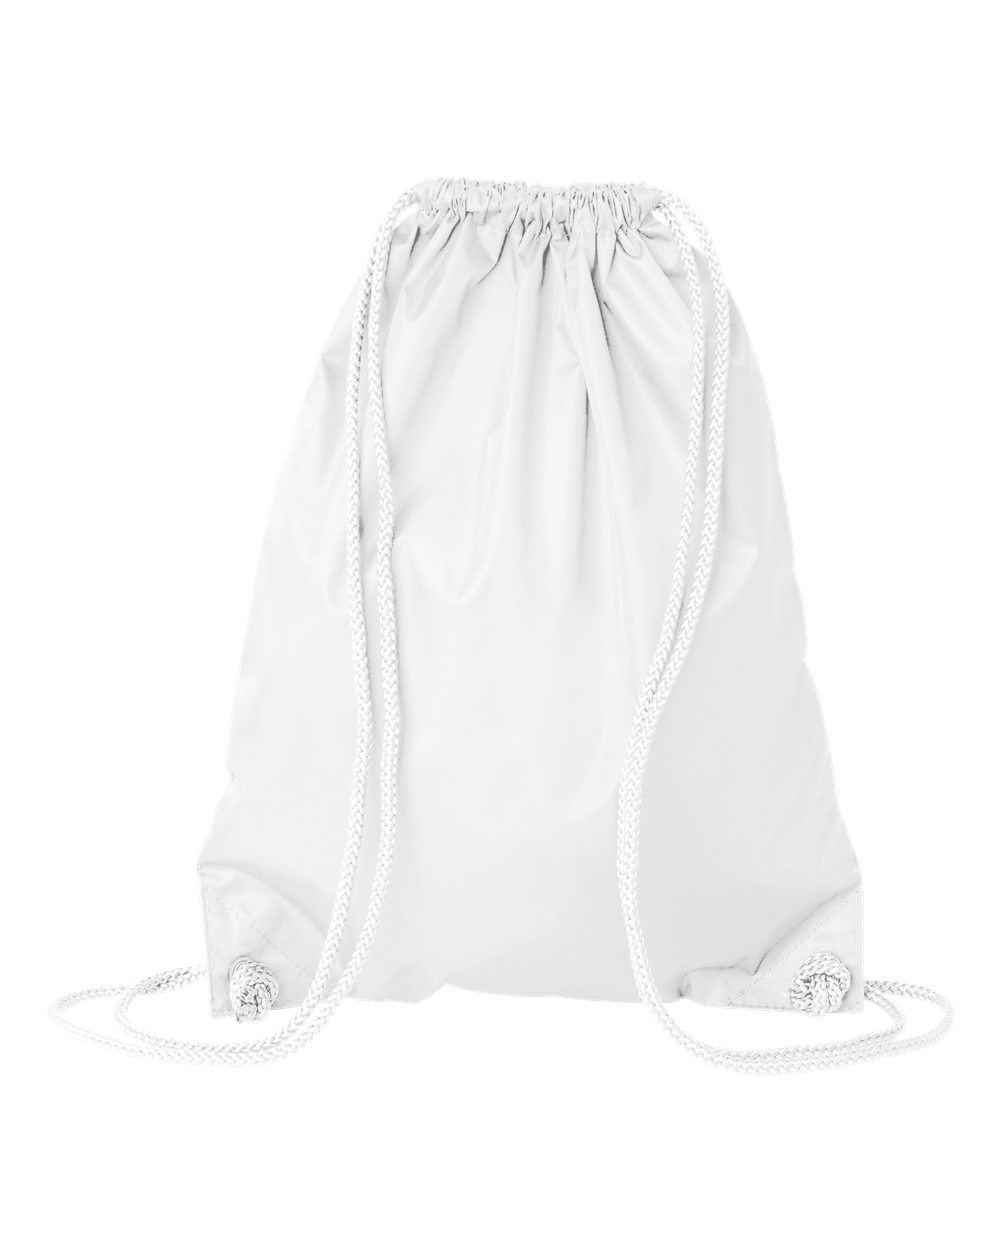 Drawstring Pack with DUROcord® - 8881-